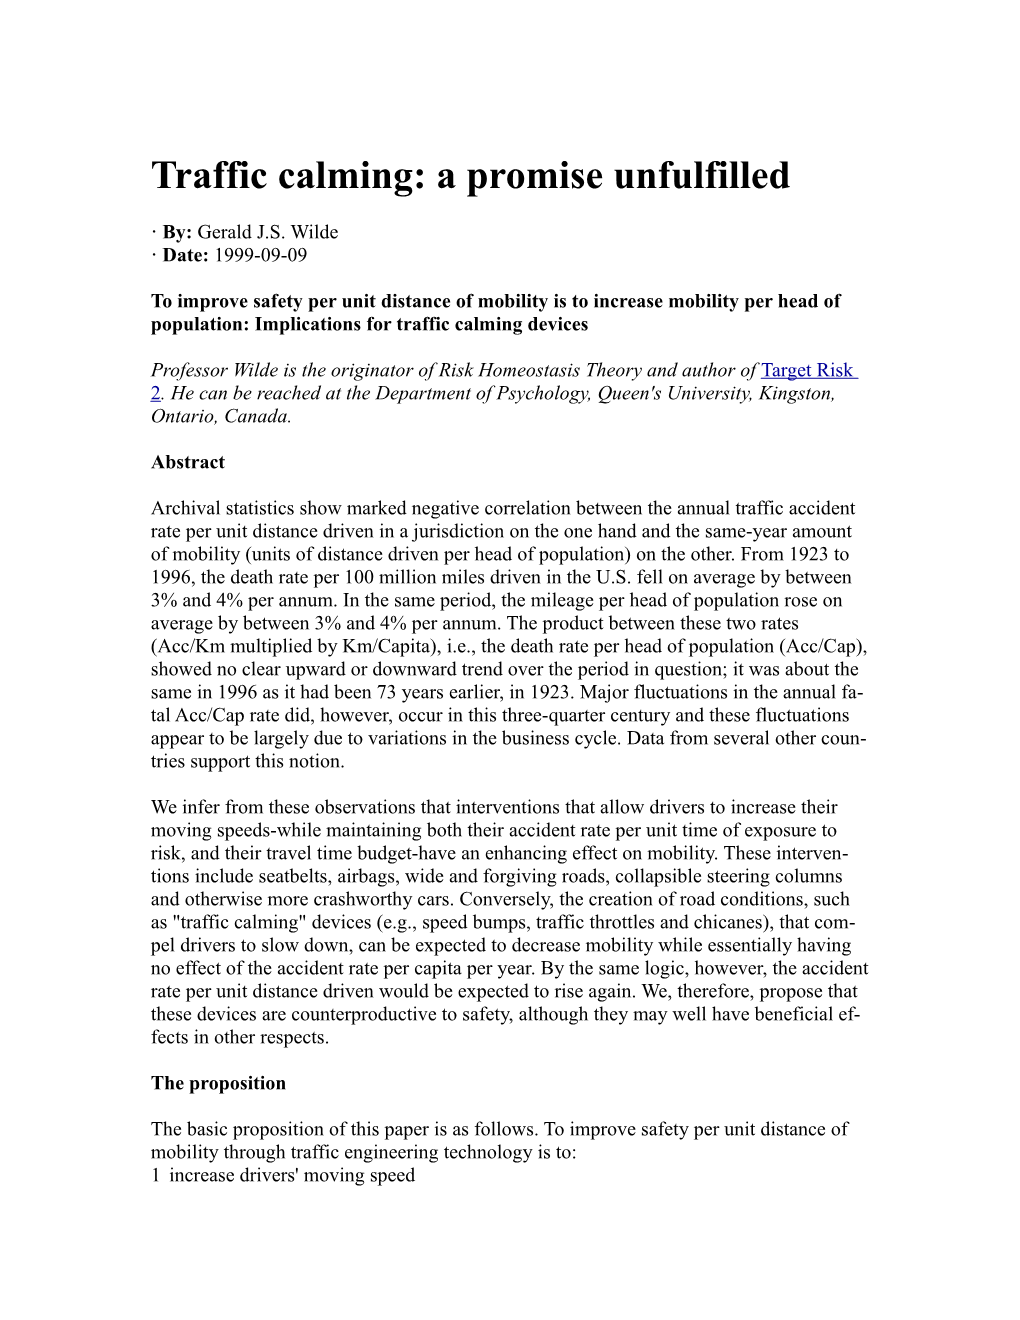 Traffic Calming: a Promise Unfulfilled